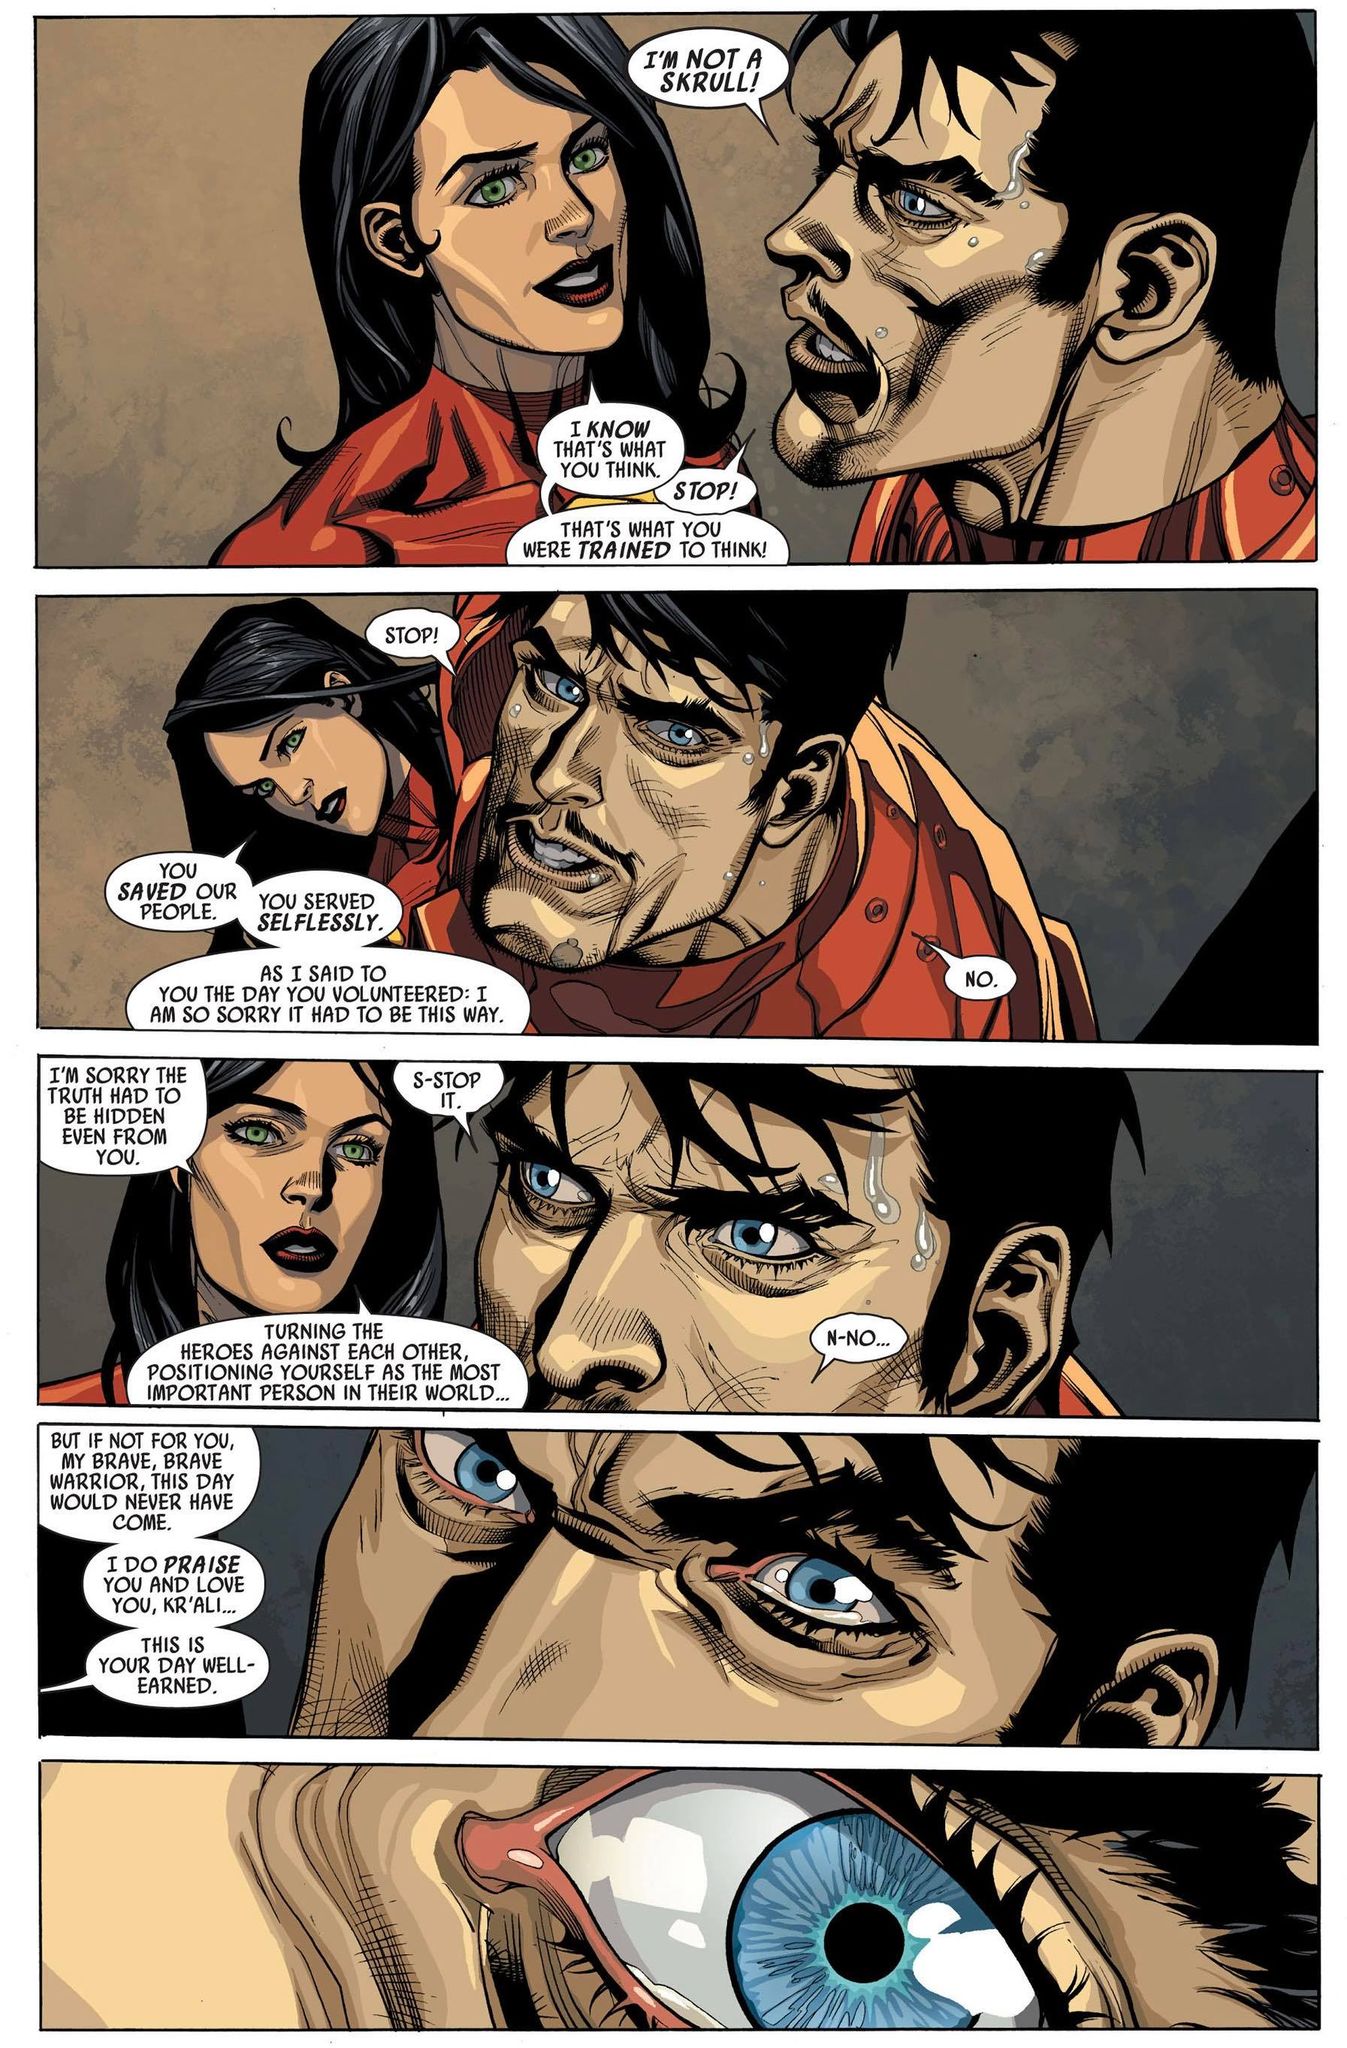 Veranke messes with Tony Stark's mind in Secret Invasion #3, penciled by Leinil Francis Yu